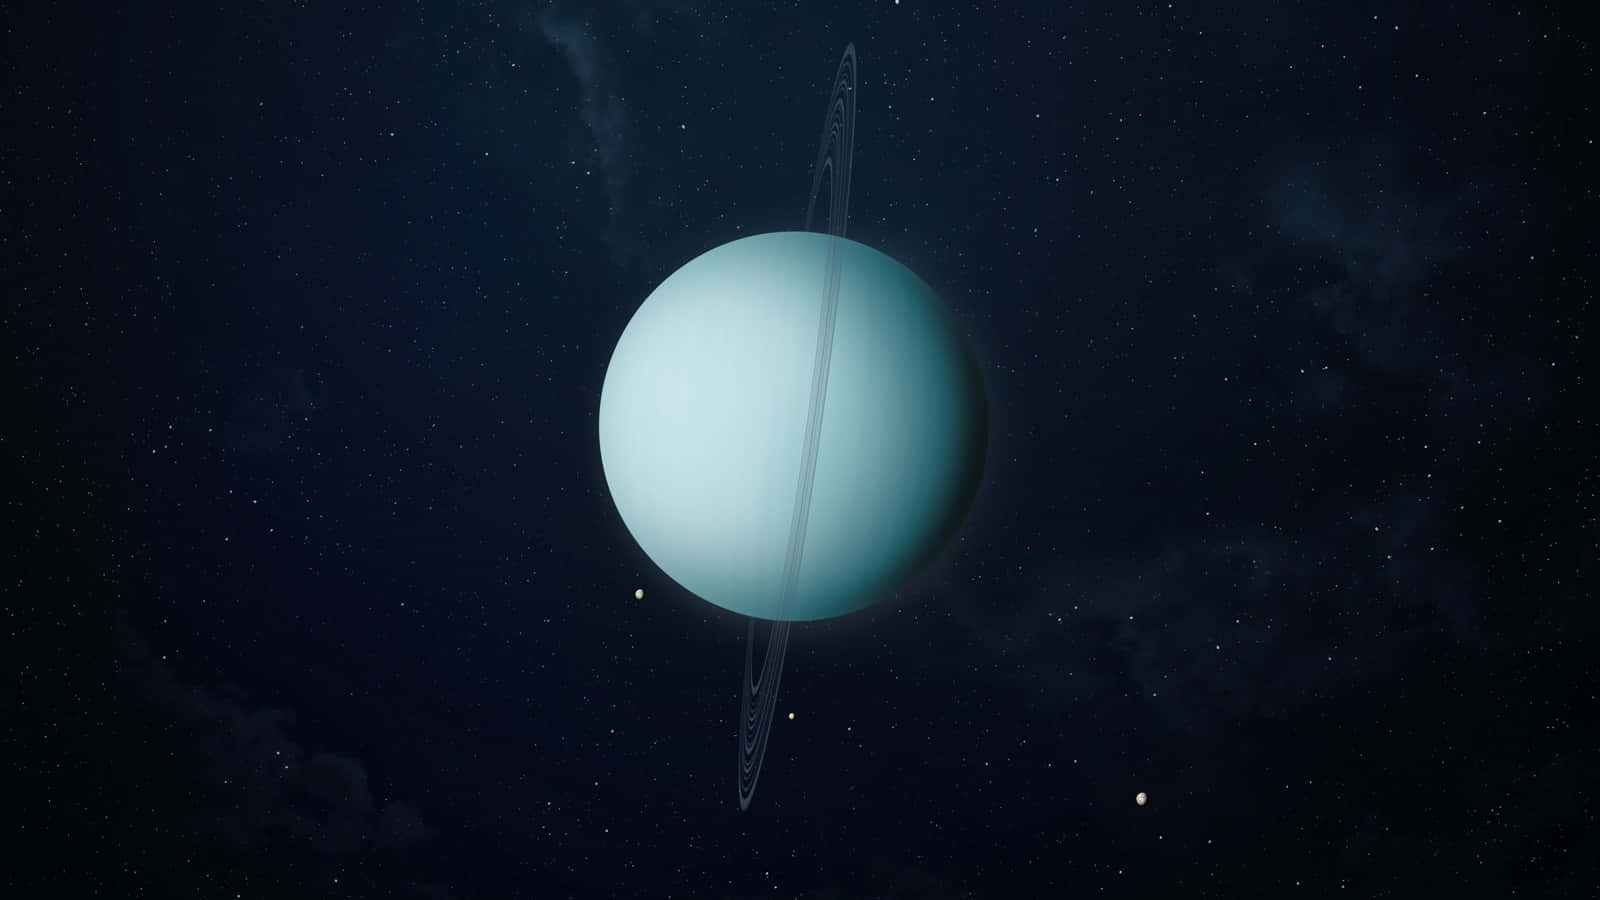 A beautiful view of Uranus, one of the most distant planets in our Solar System